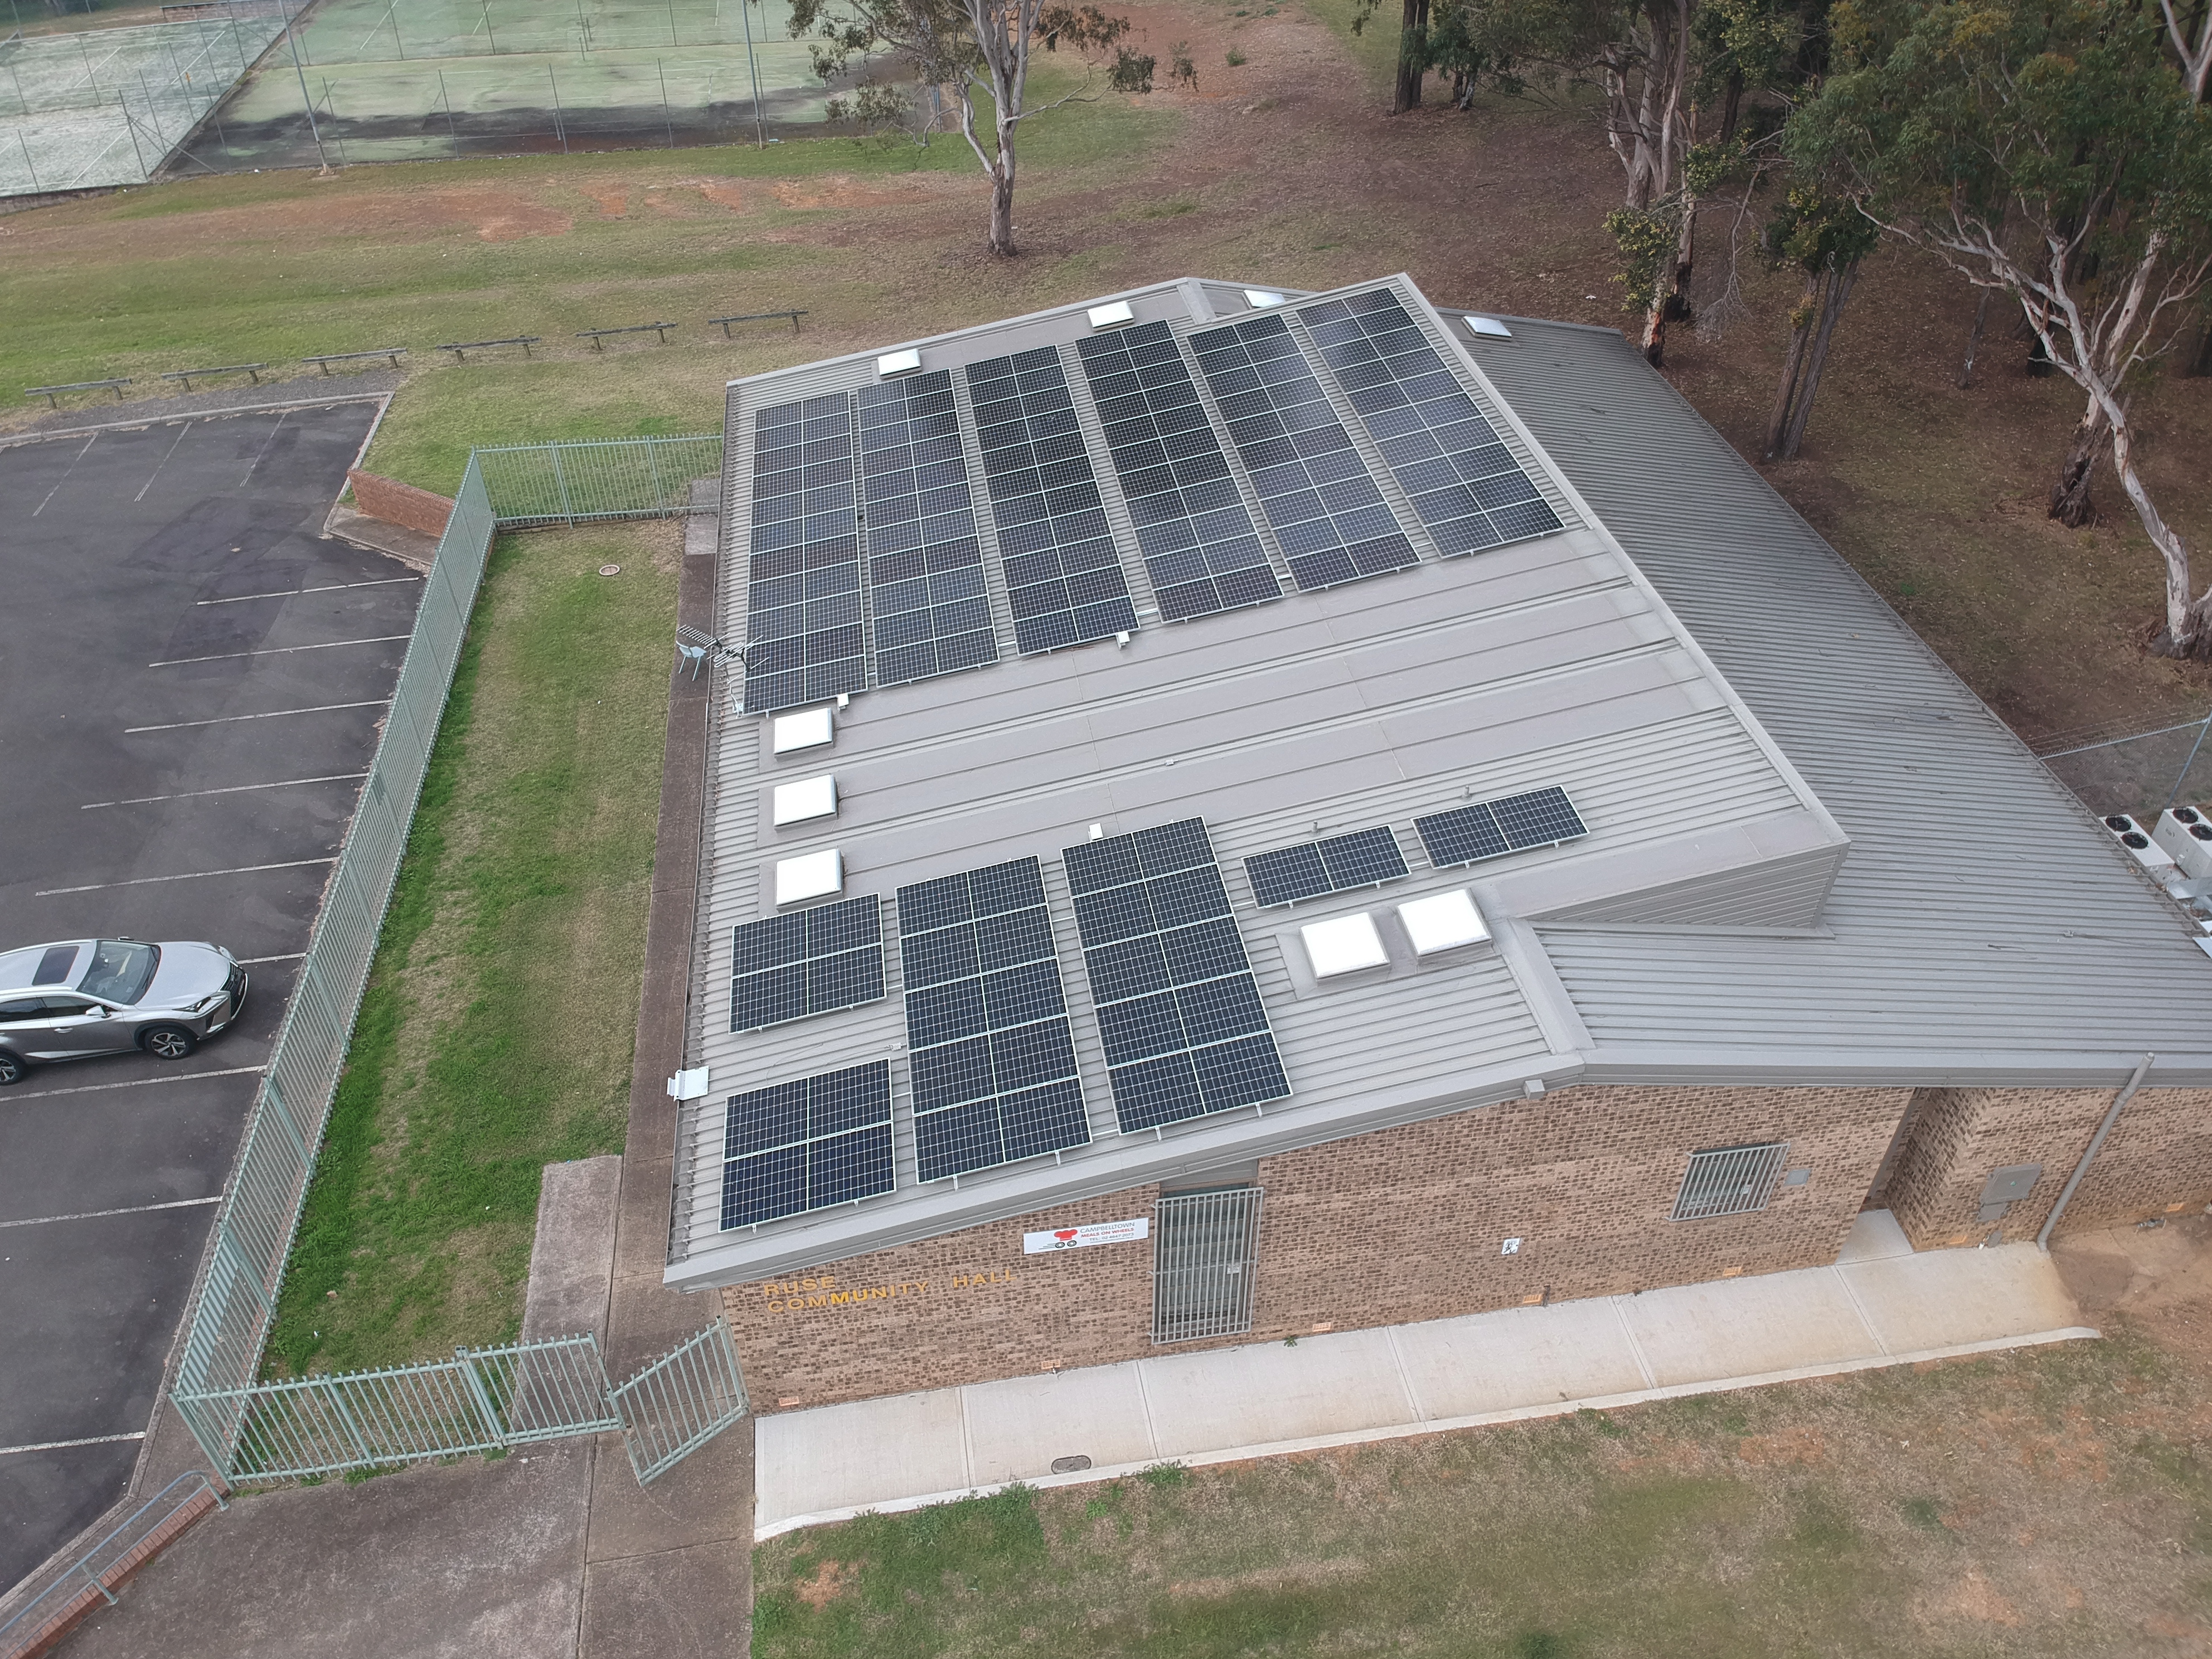 image of campbelltown ruse community hall with solar panel installation